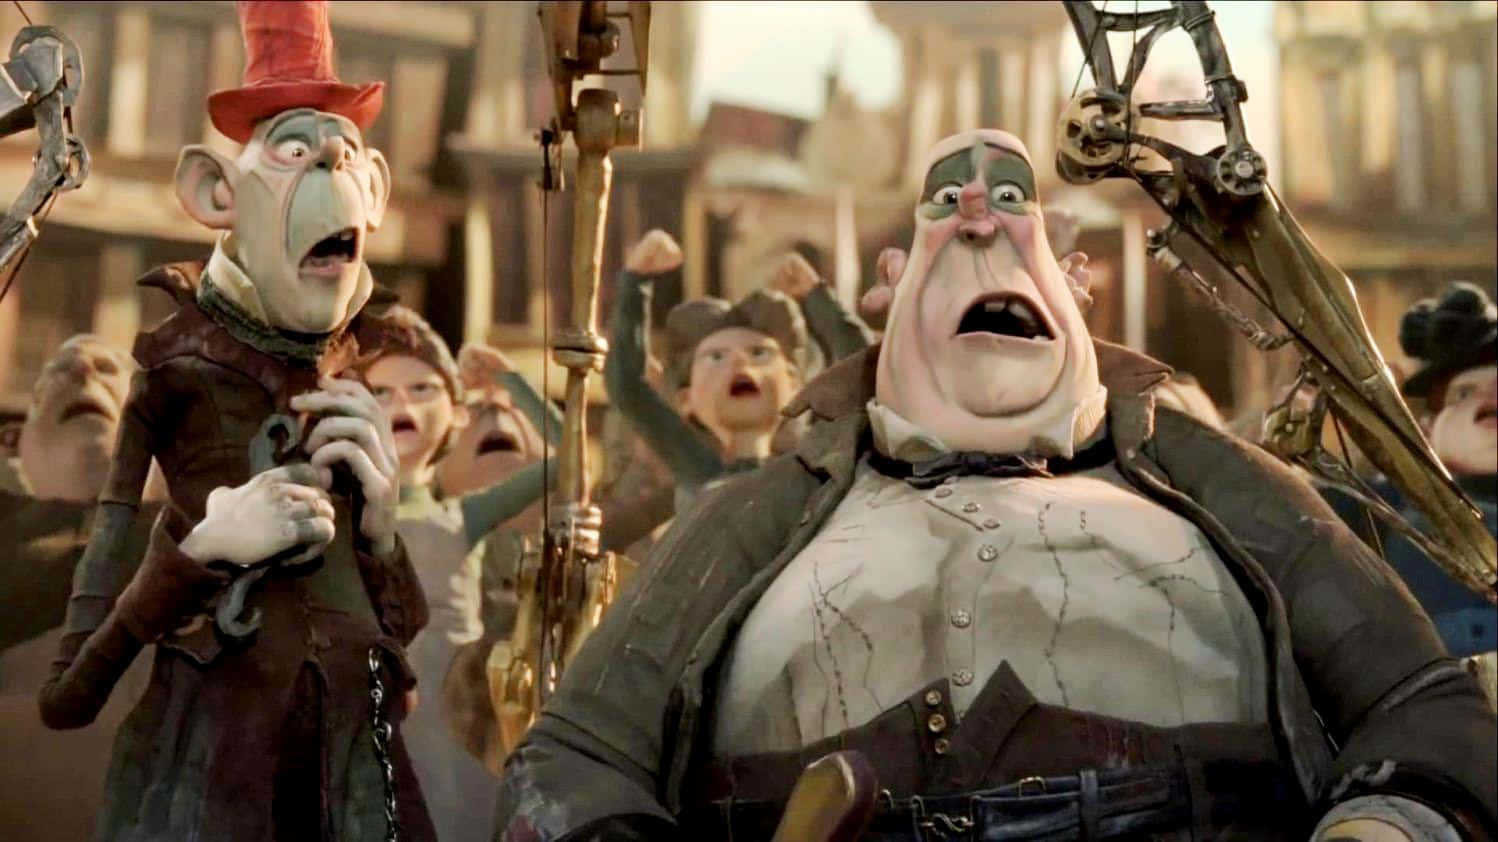 Mr. Trout and Archibald Snatcher from The Boxtrolls animated movie. Wallpaper